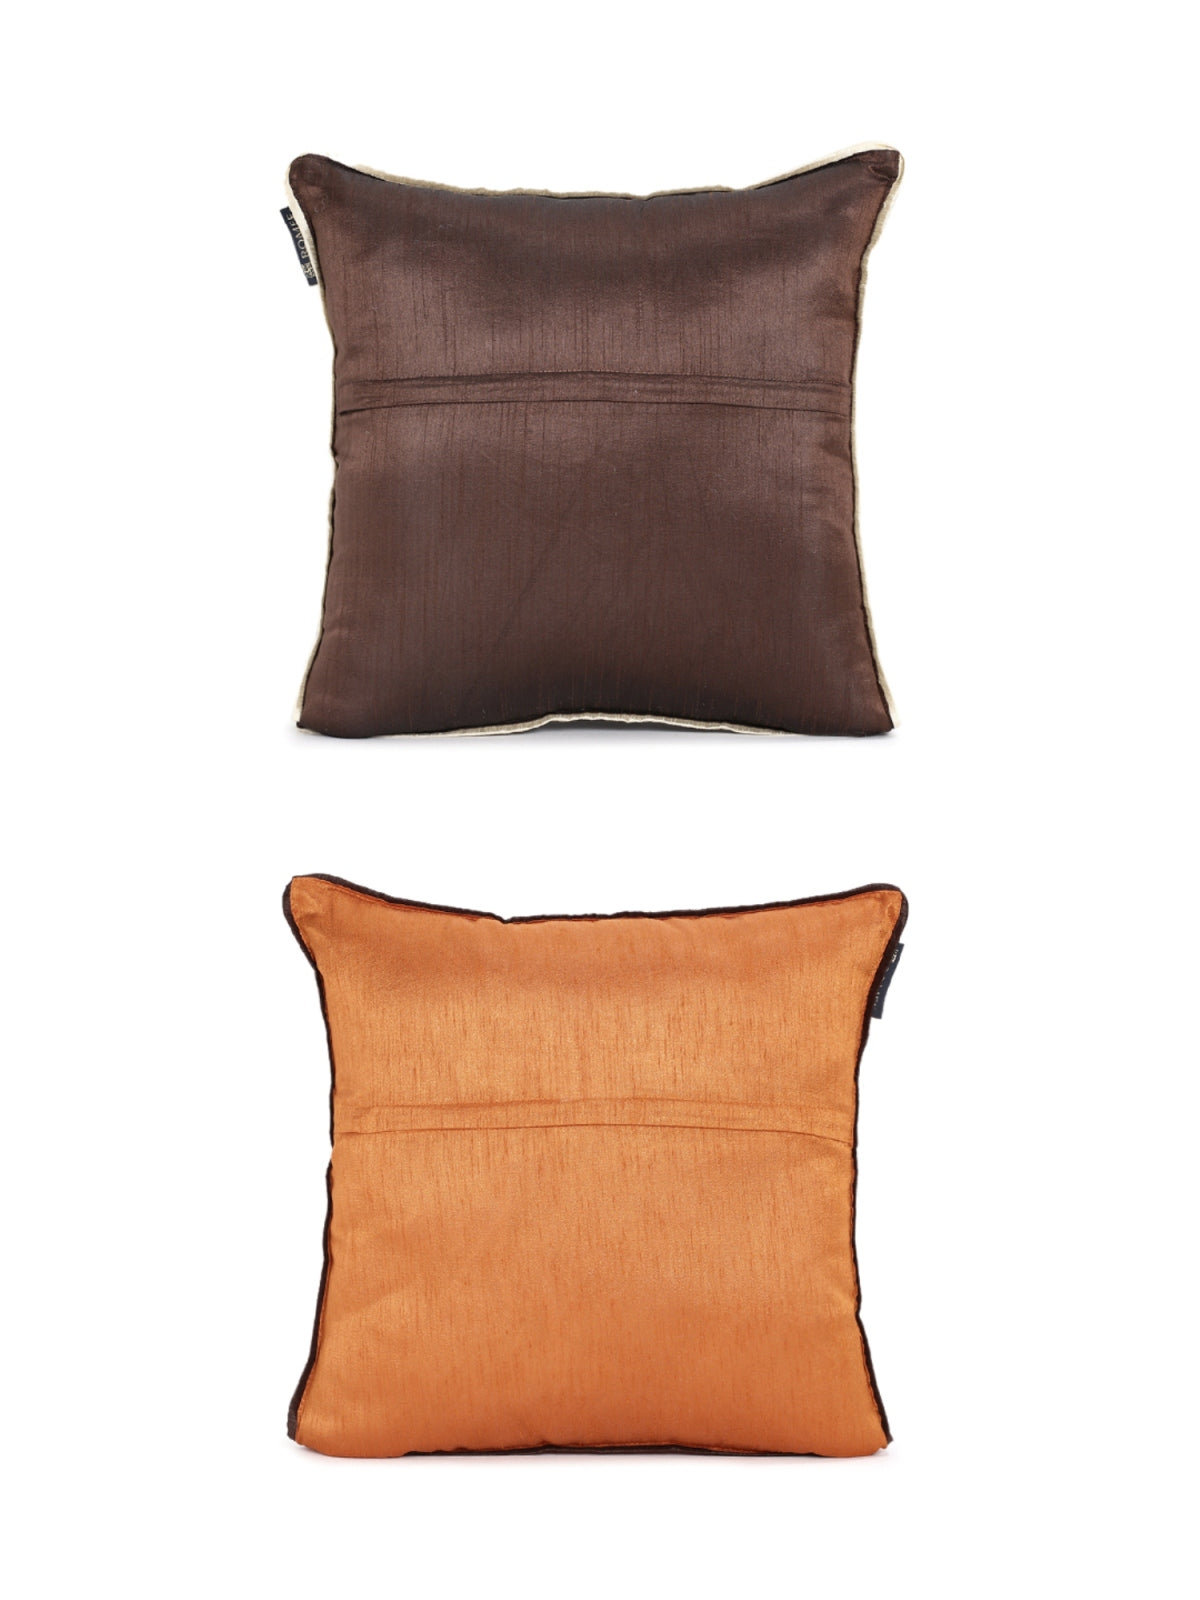 Embroidered 2 Piece Polyester Cushion Cover Set - 16" x 16", Orange and Brown